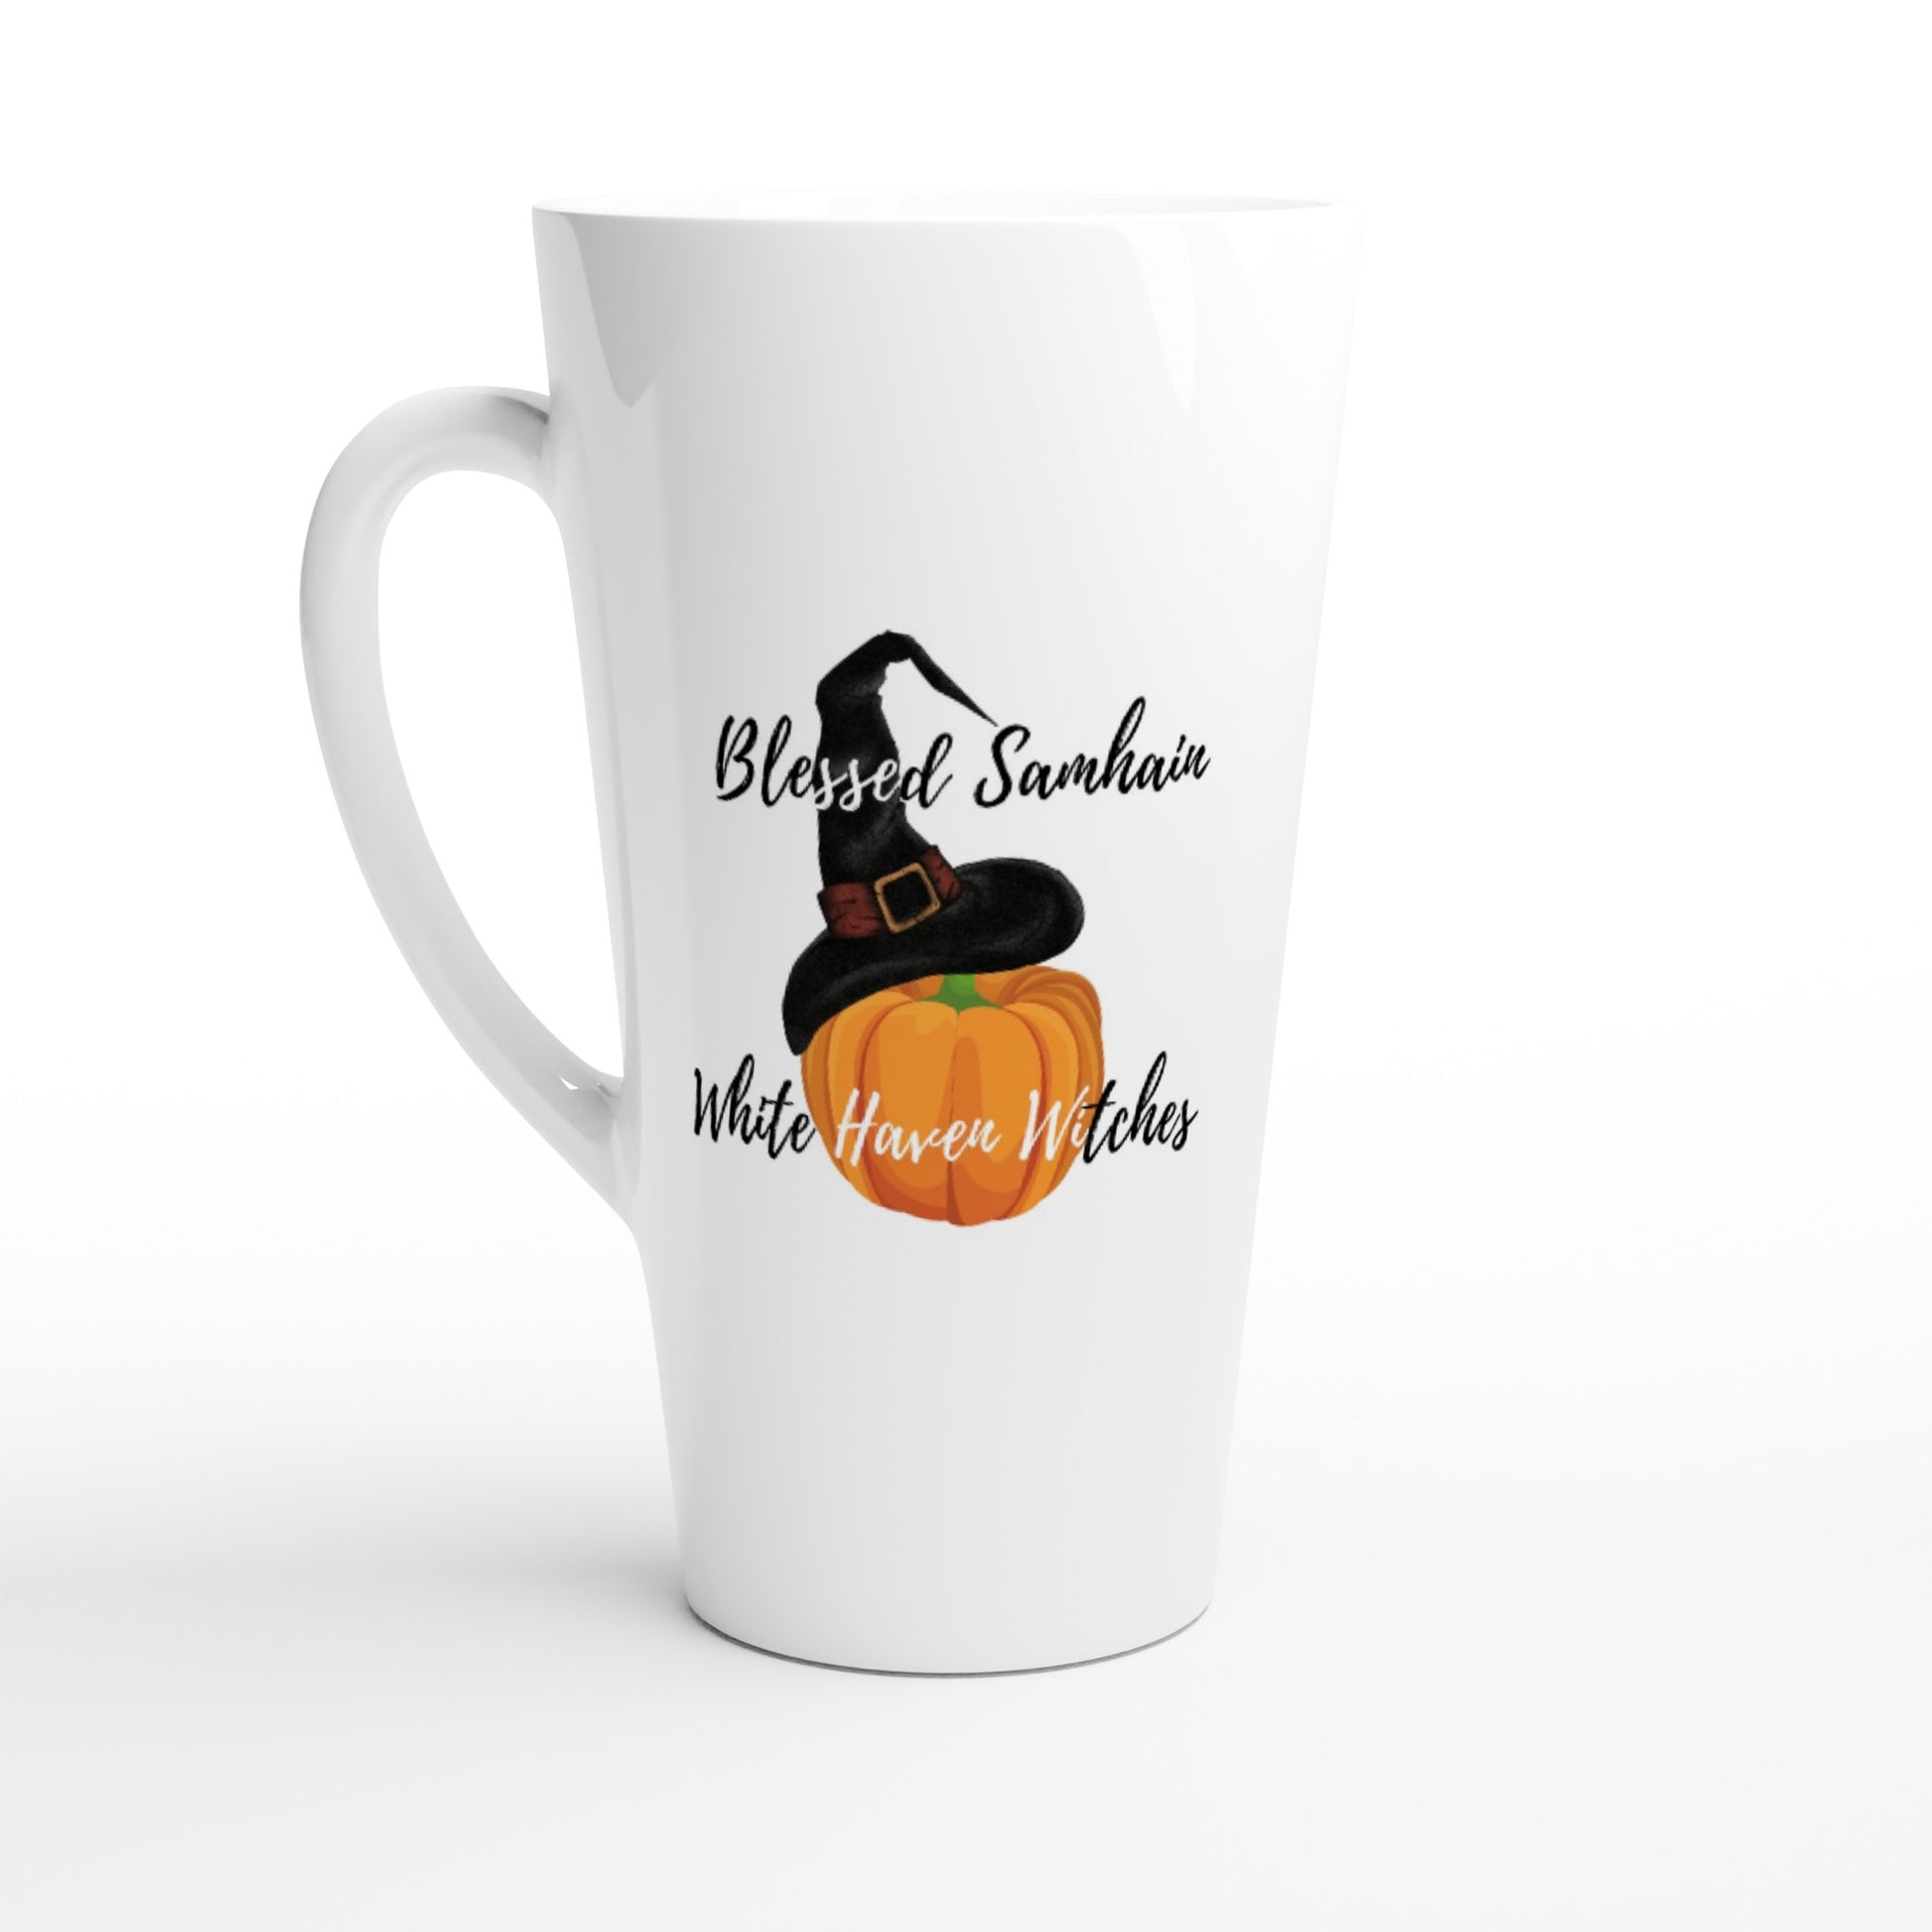 Blessed Samhain White Haven Witches latte mug